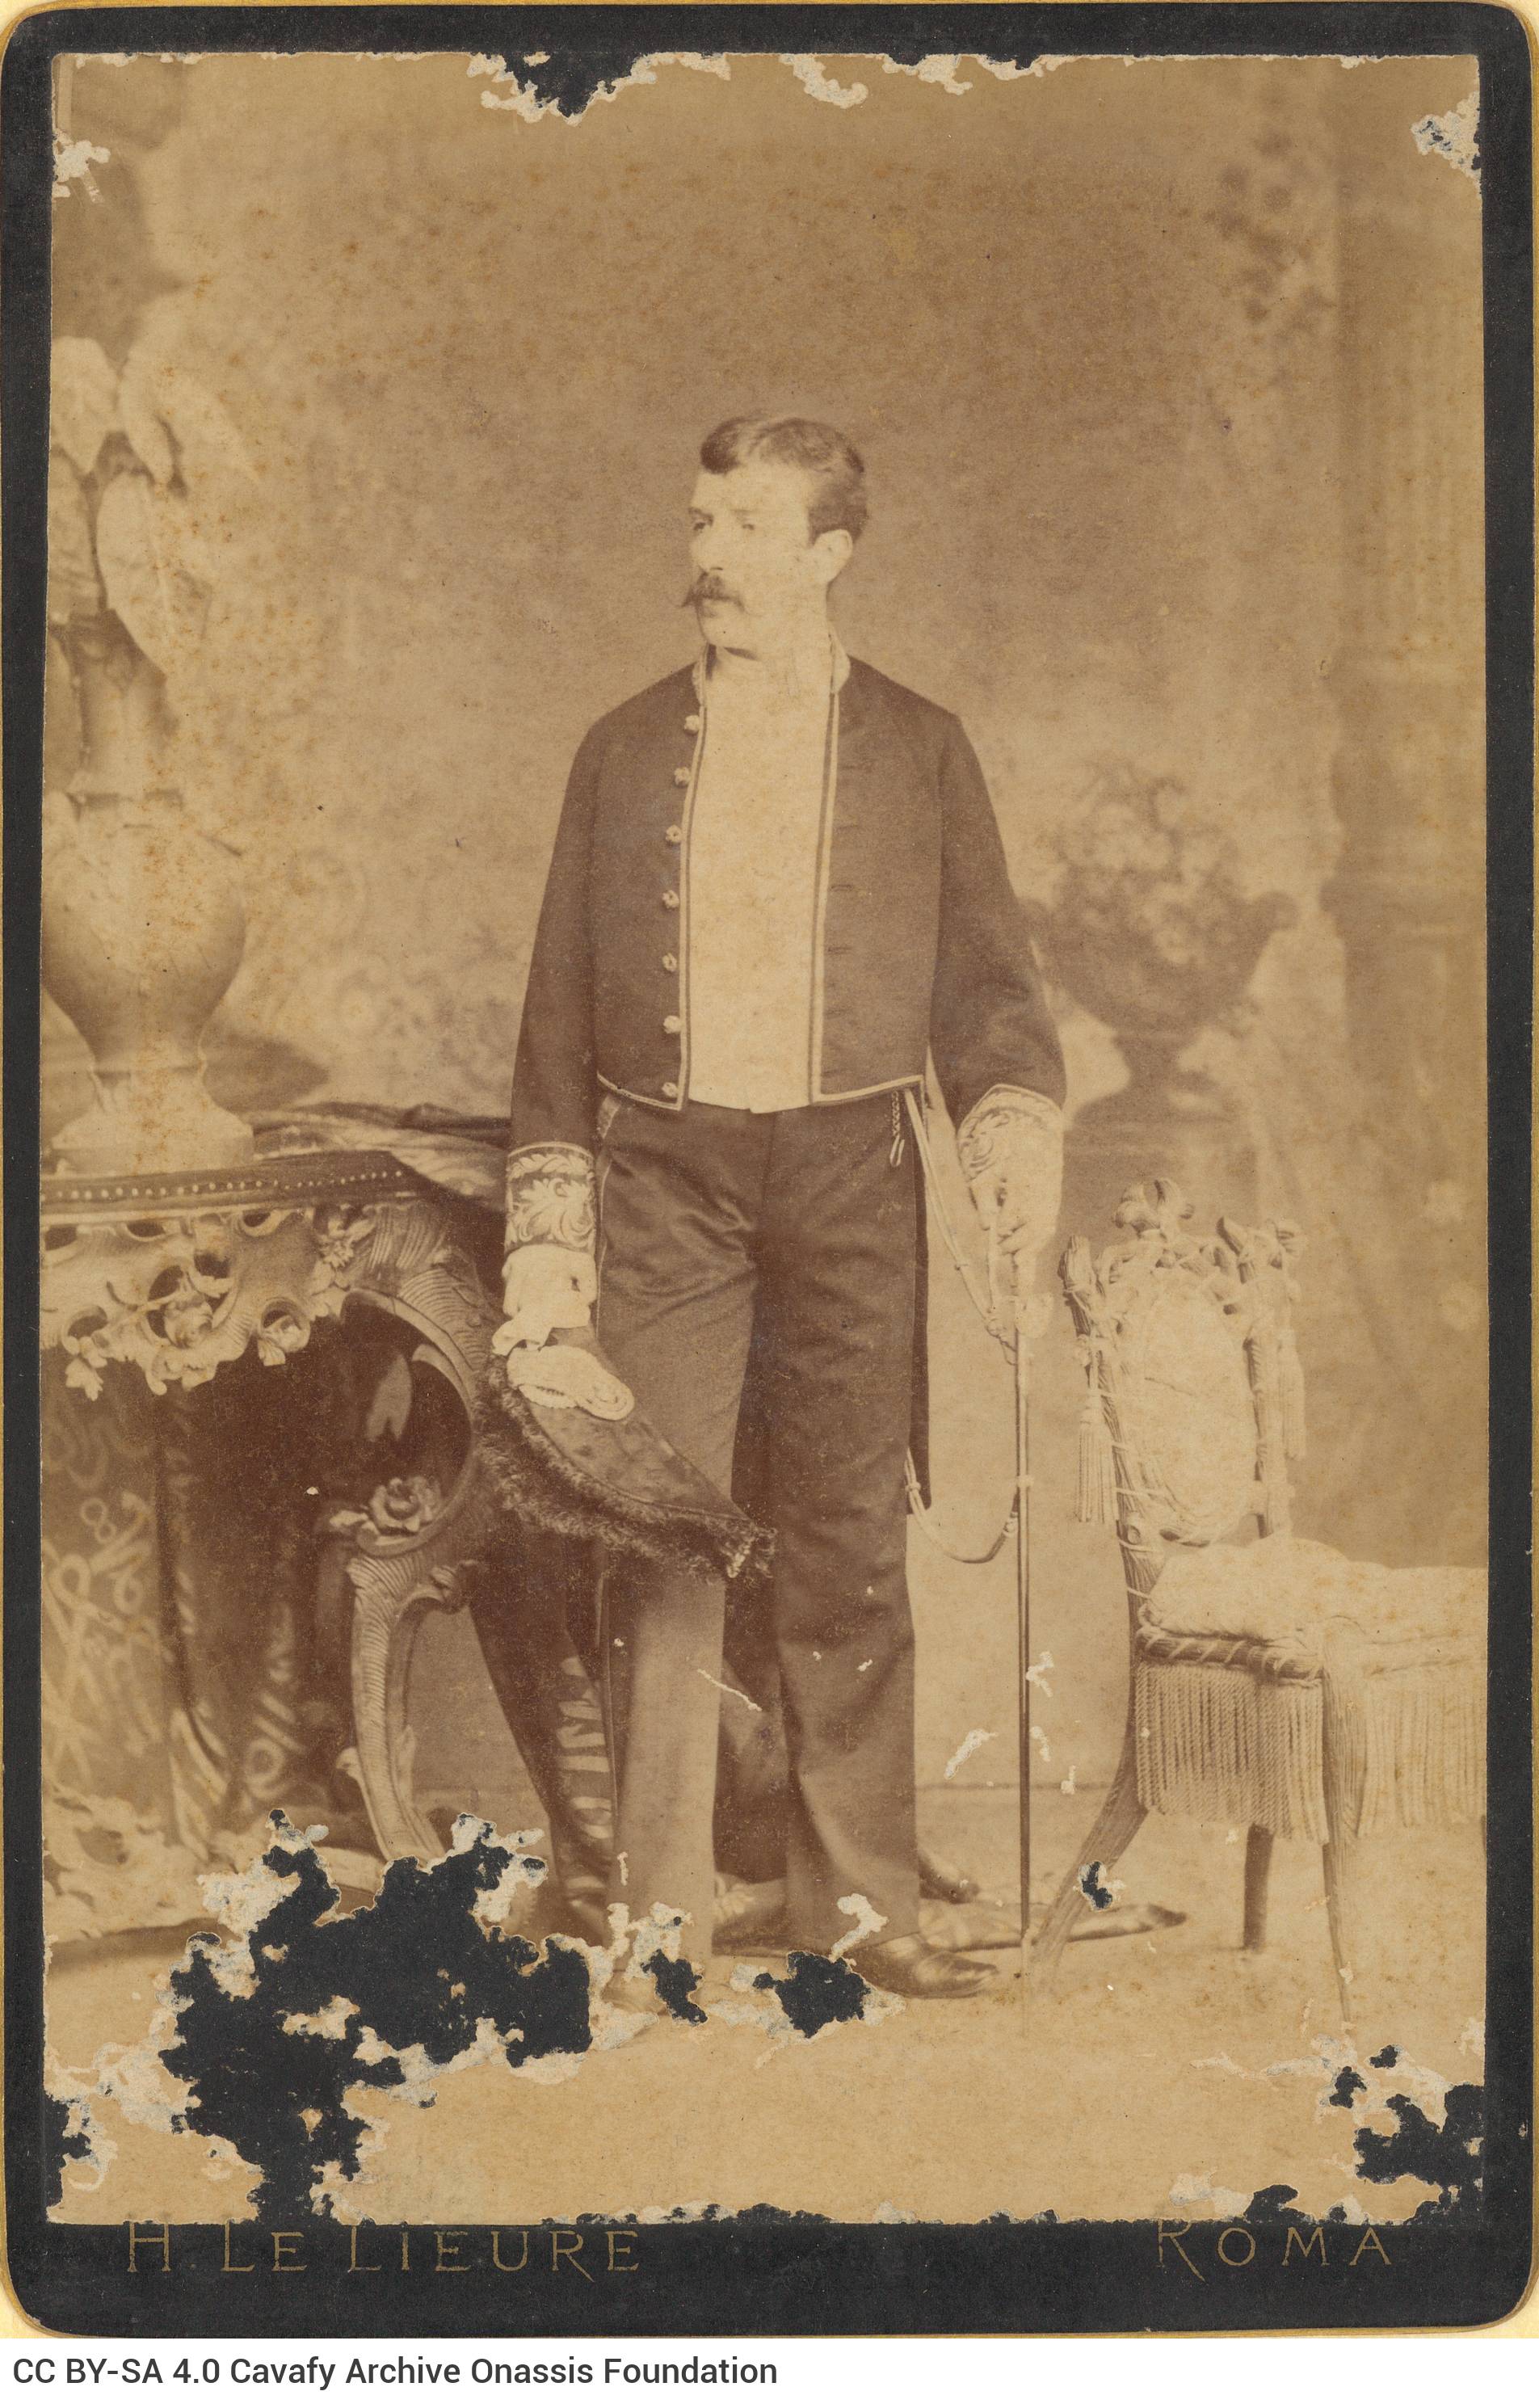 Undated photographic portrait of a man standing between a console table and a chair. He is holding a sword in his left hand a